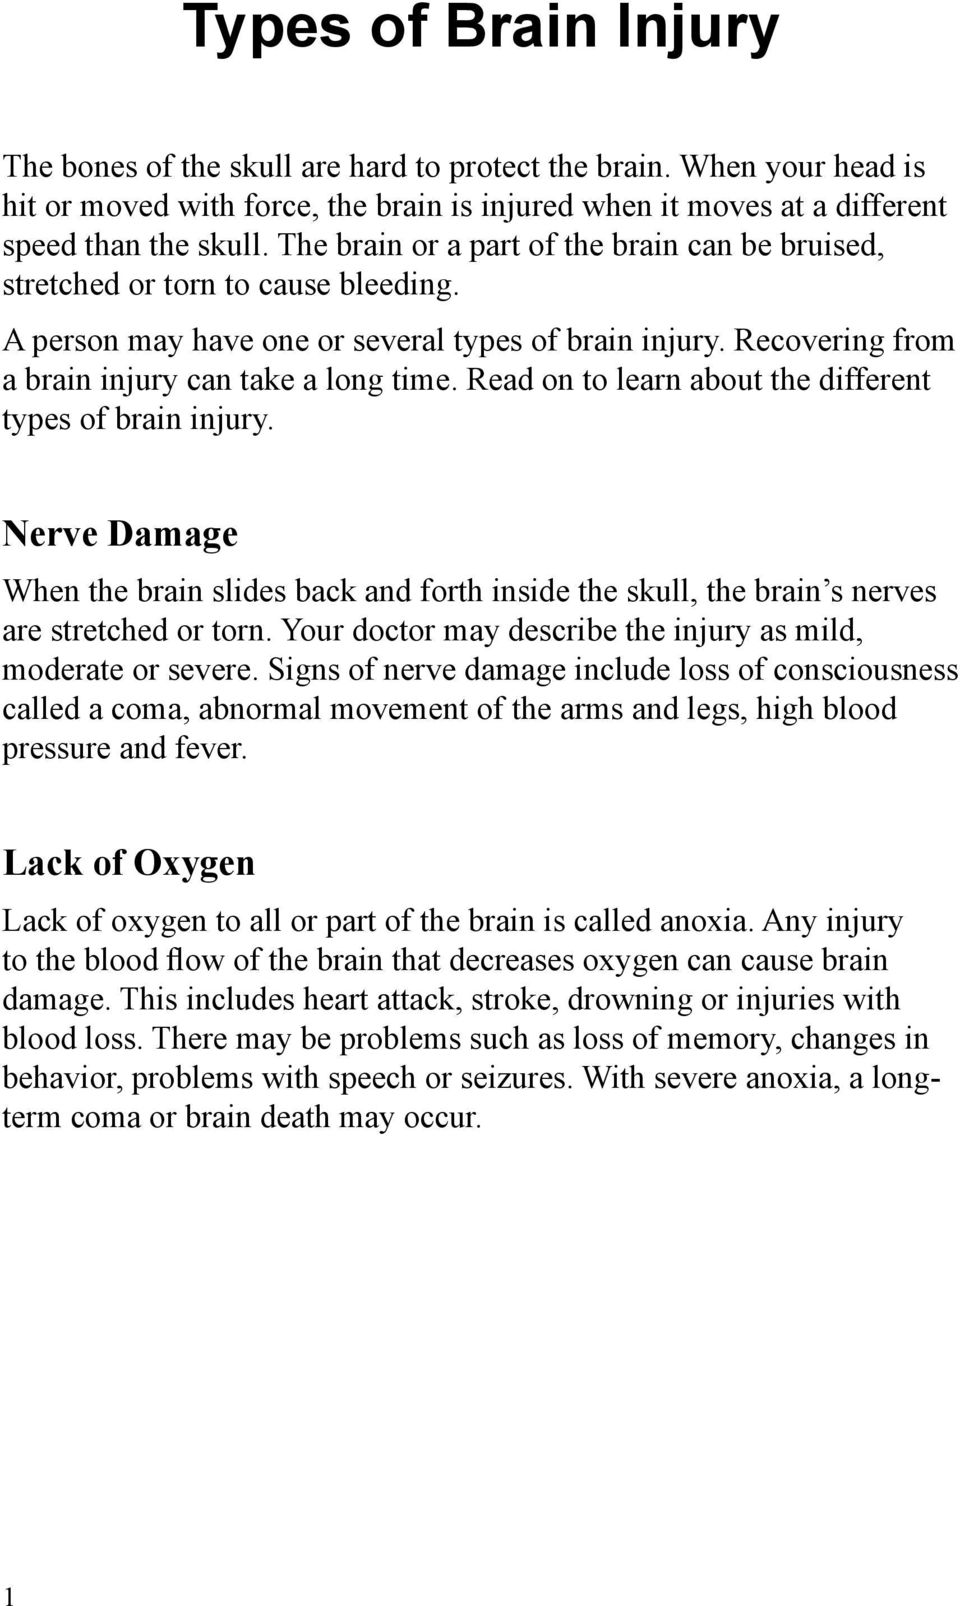 Read on to learn about the different types of brain injury. Nerve Damage When the brain slides back and forth inside the skull, the brain s nerves are stretched or torn.